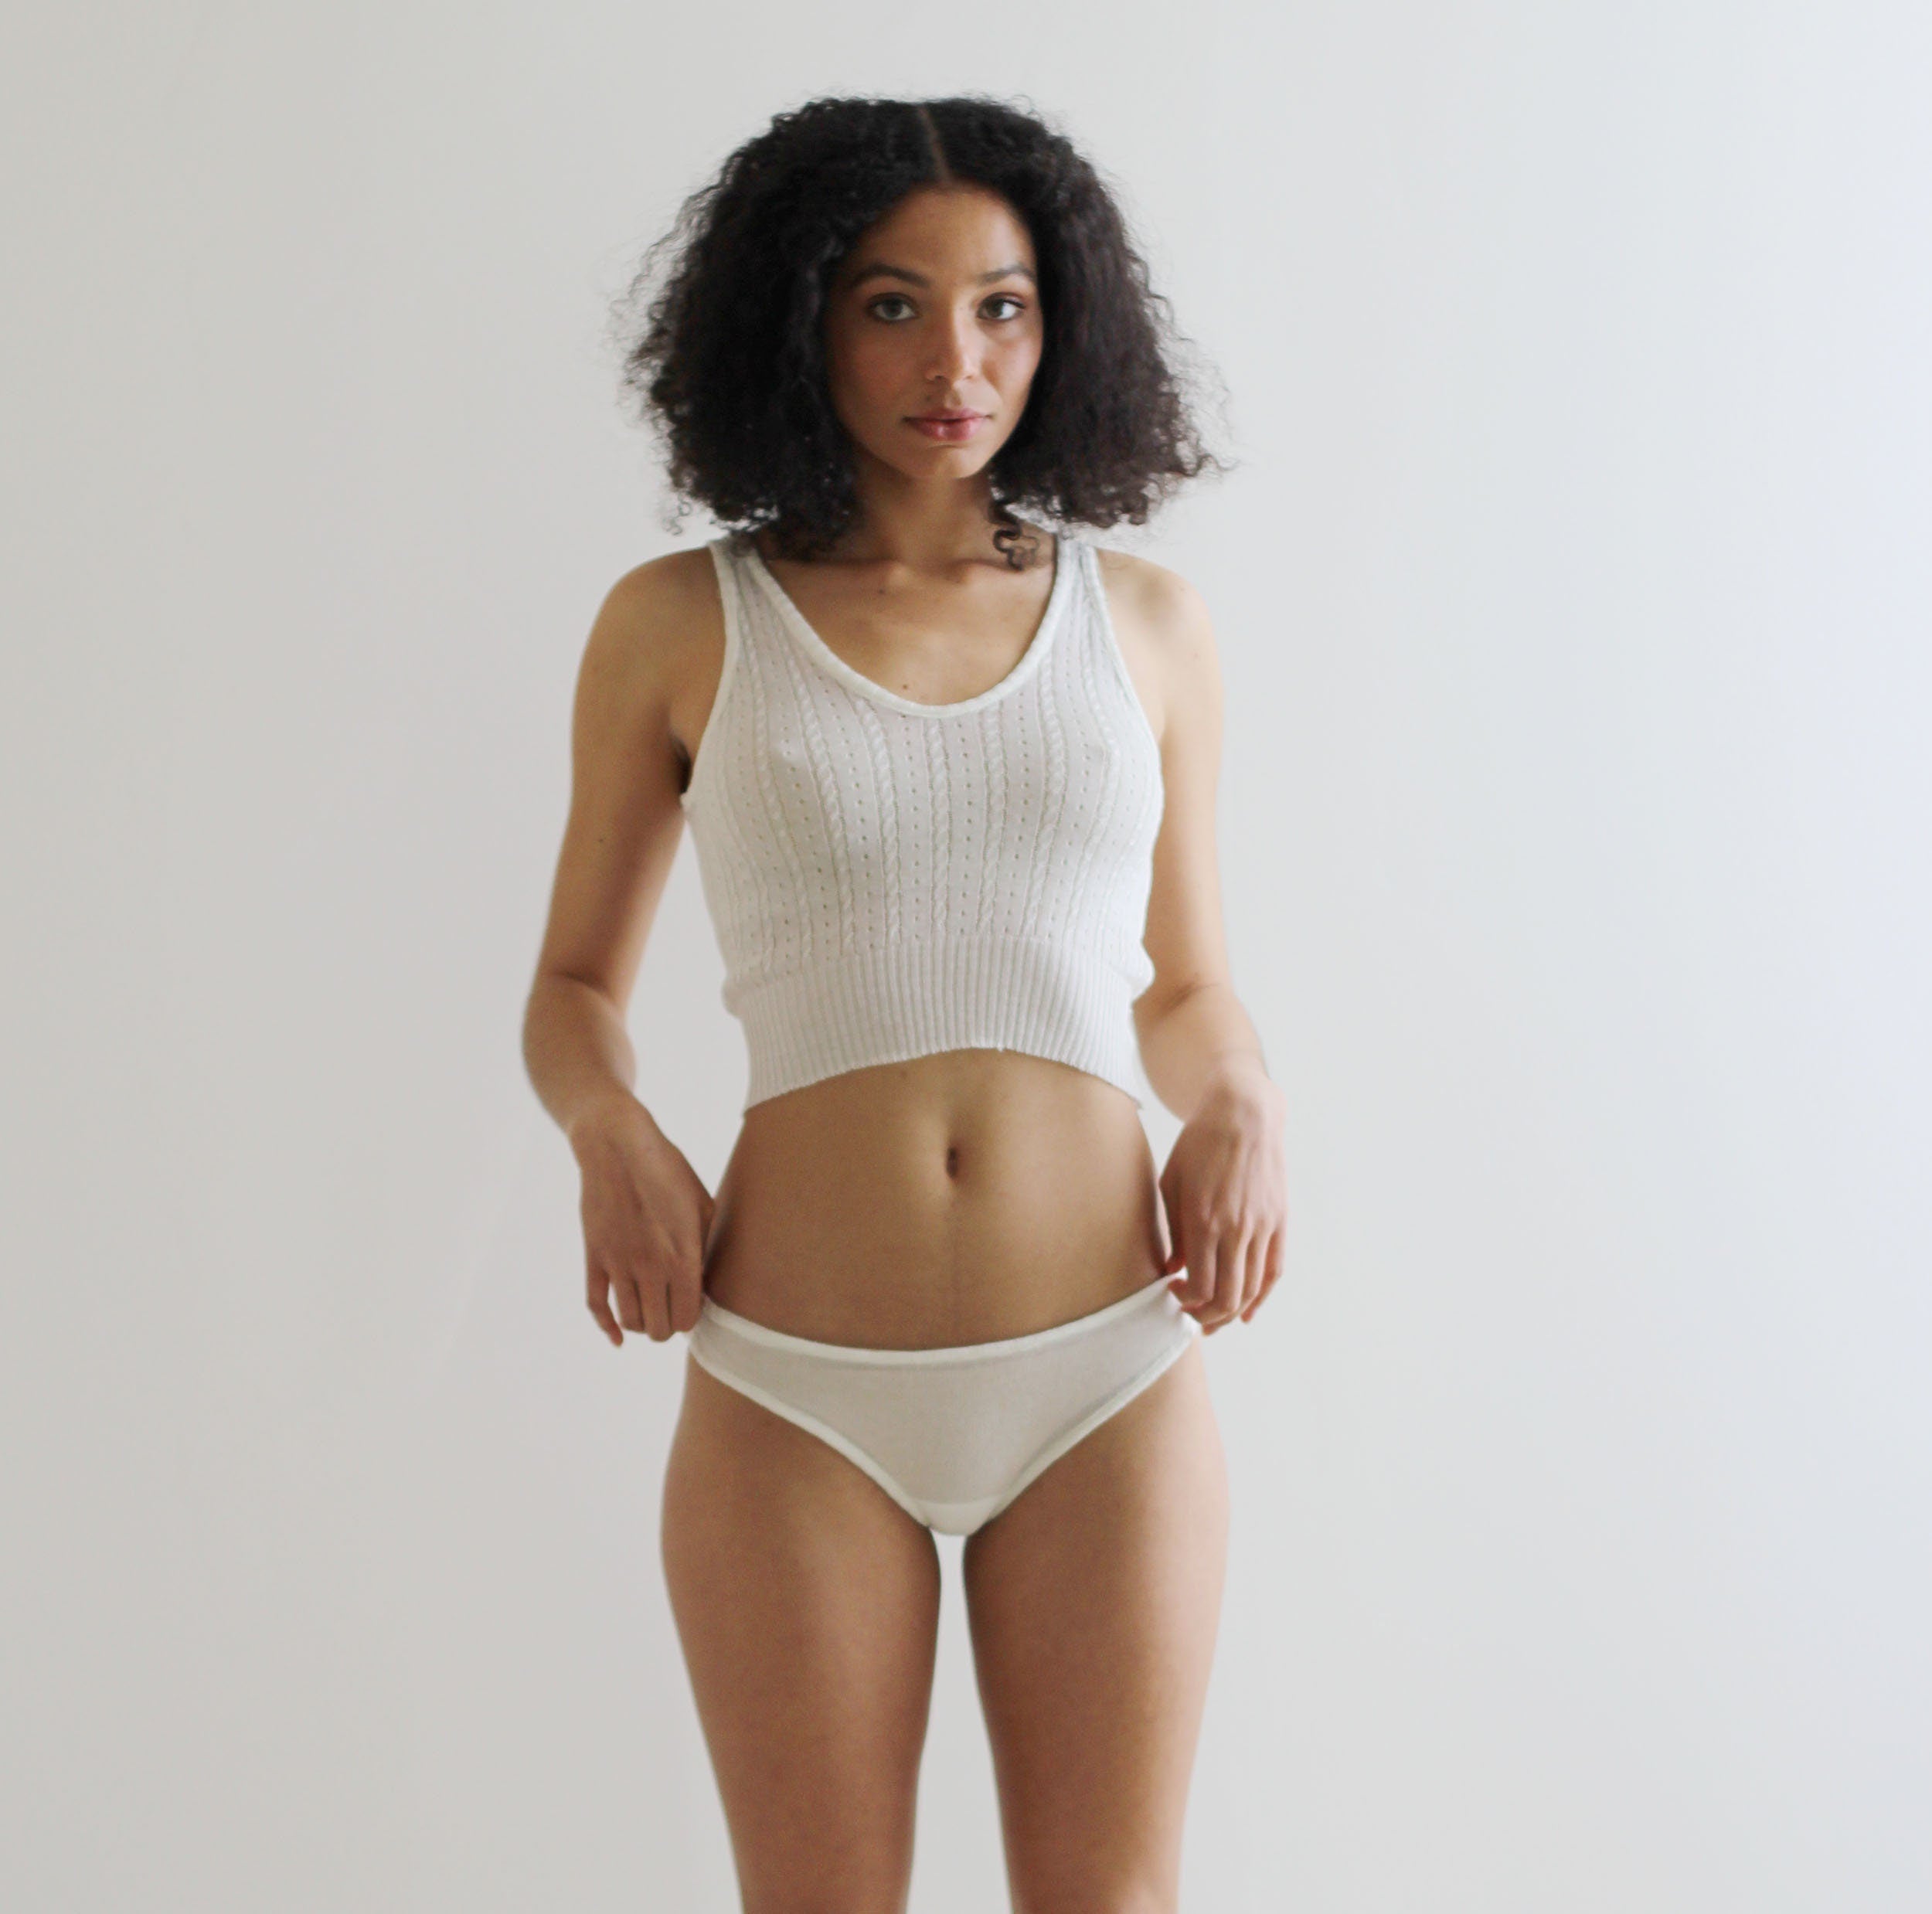 silk cashmere cropped tank top in lacy pointelle, Knitwear Camisole, Sheer Lingerie, Ready to Ship, Various Sizes- Ivory